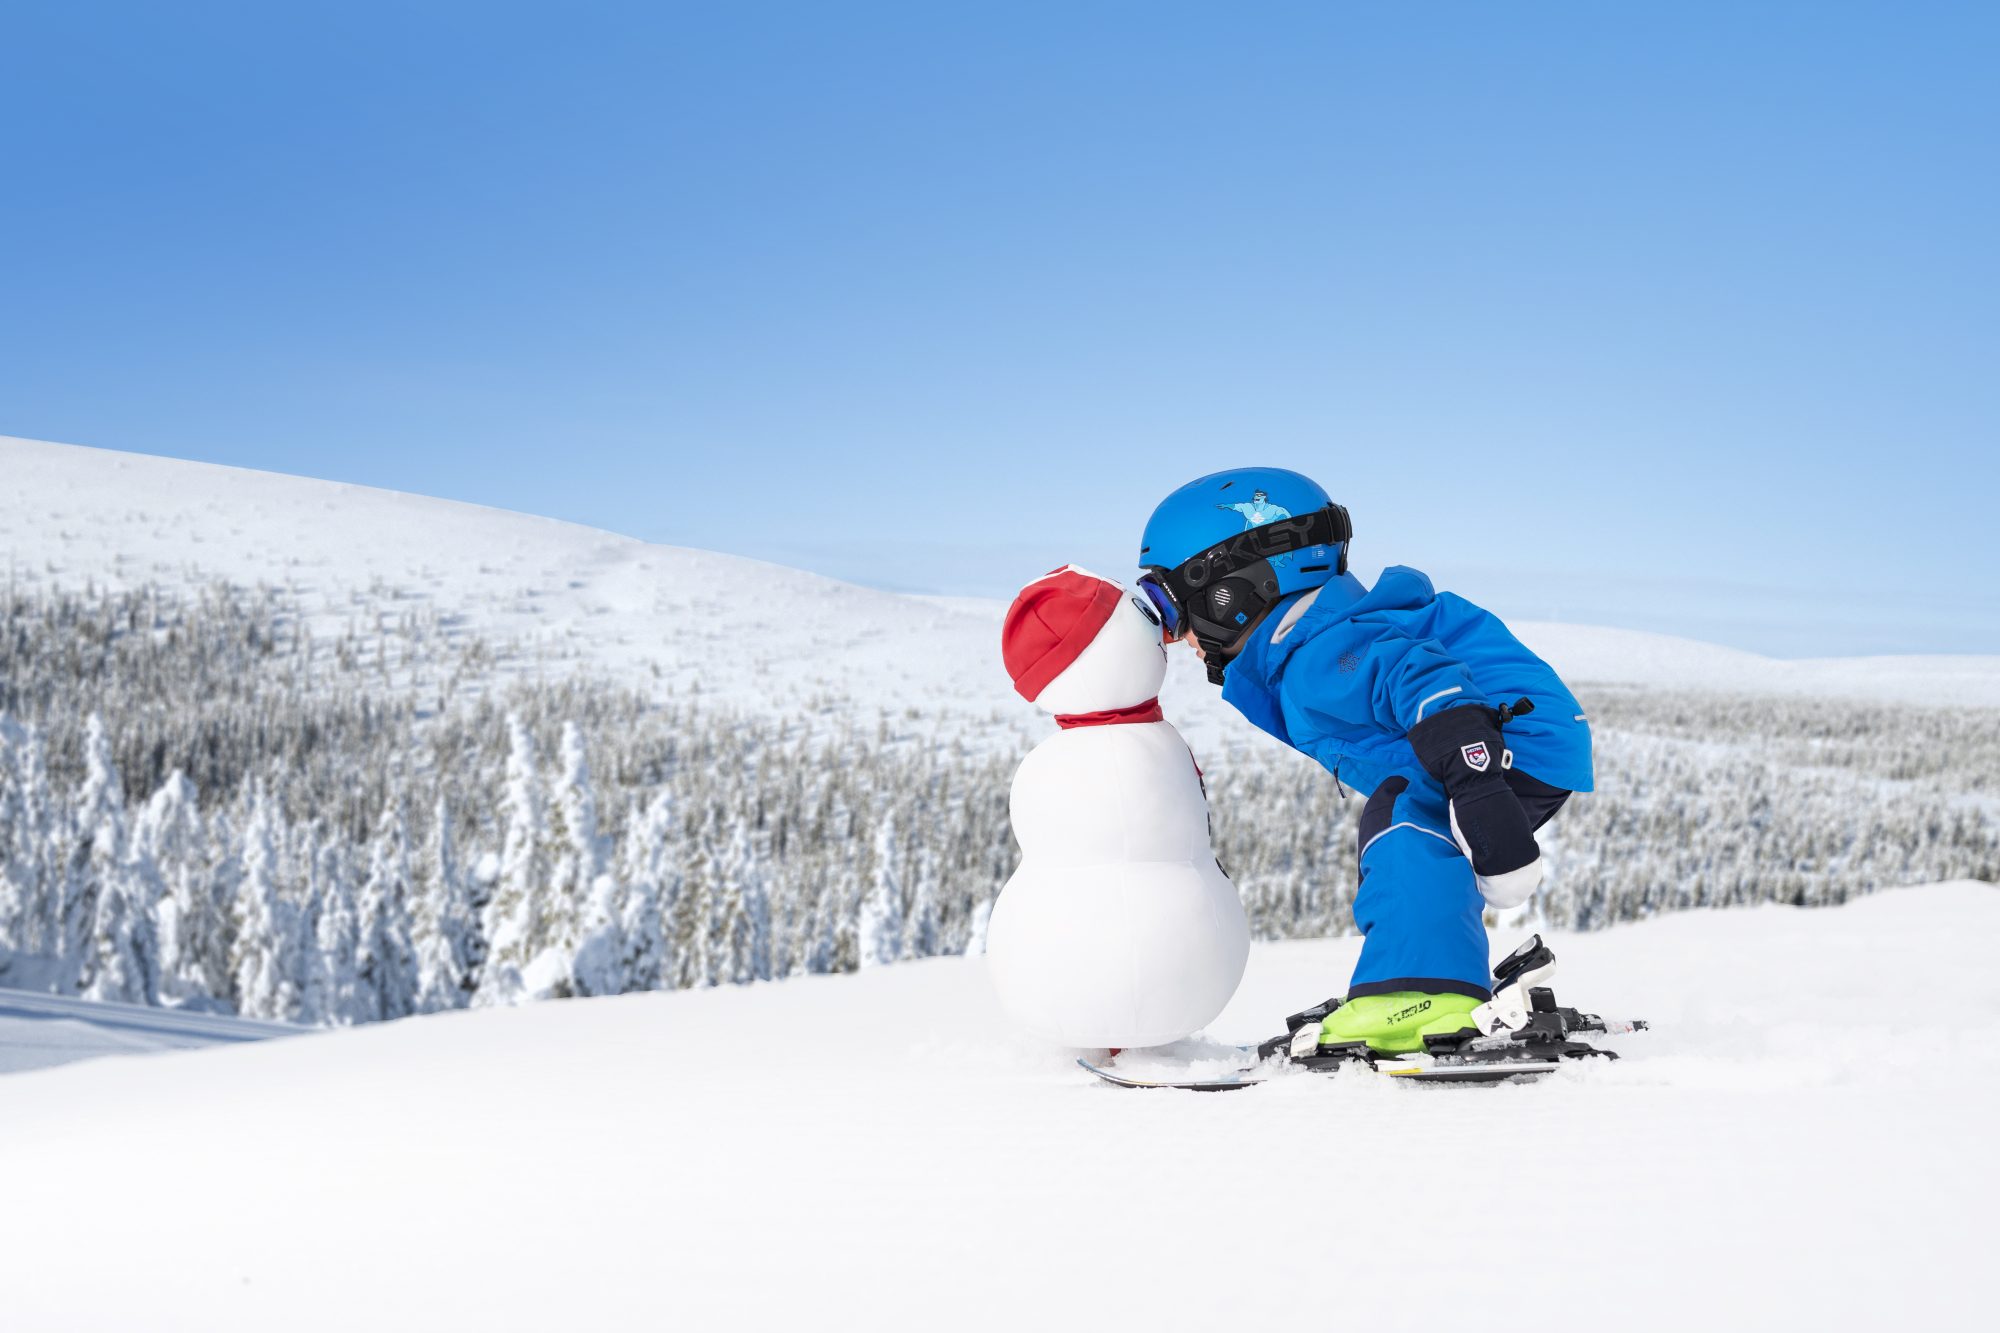 A kid kisses a snowman in the Valle of Salen. Photo Courtesy: SkiStaar. SkiStar showcases record results for the first half of 2018/19.